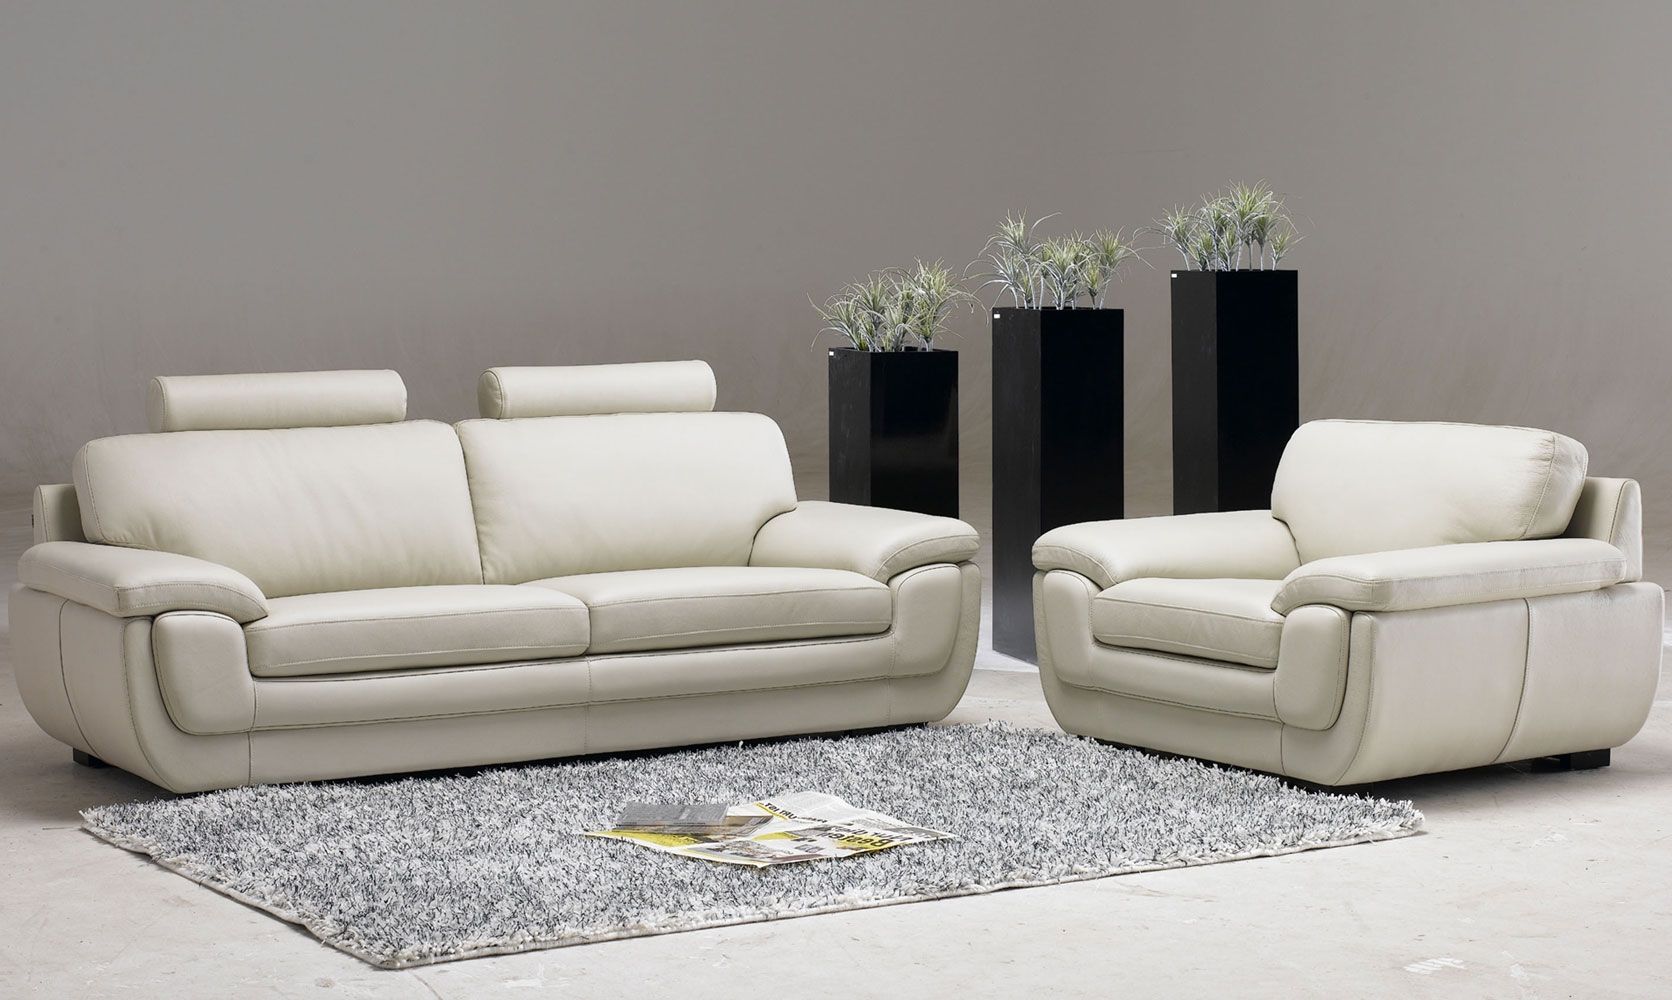 Leather Living Room Furniture With Three Decorative Plants House With Sofa Chairs For Living Room (View 1 of 15)